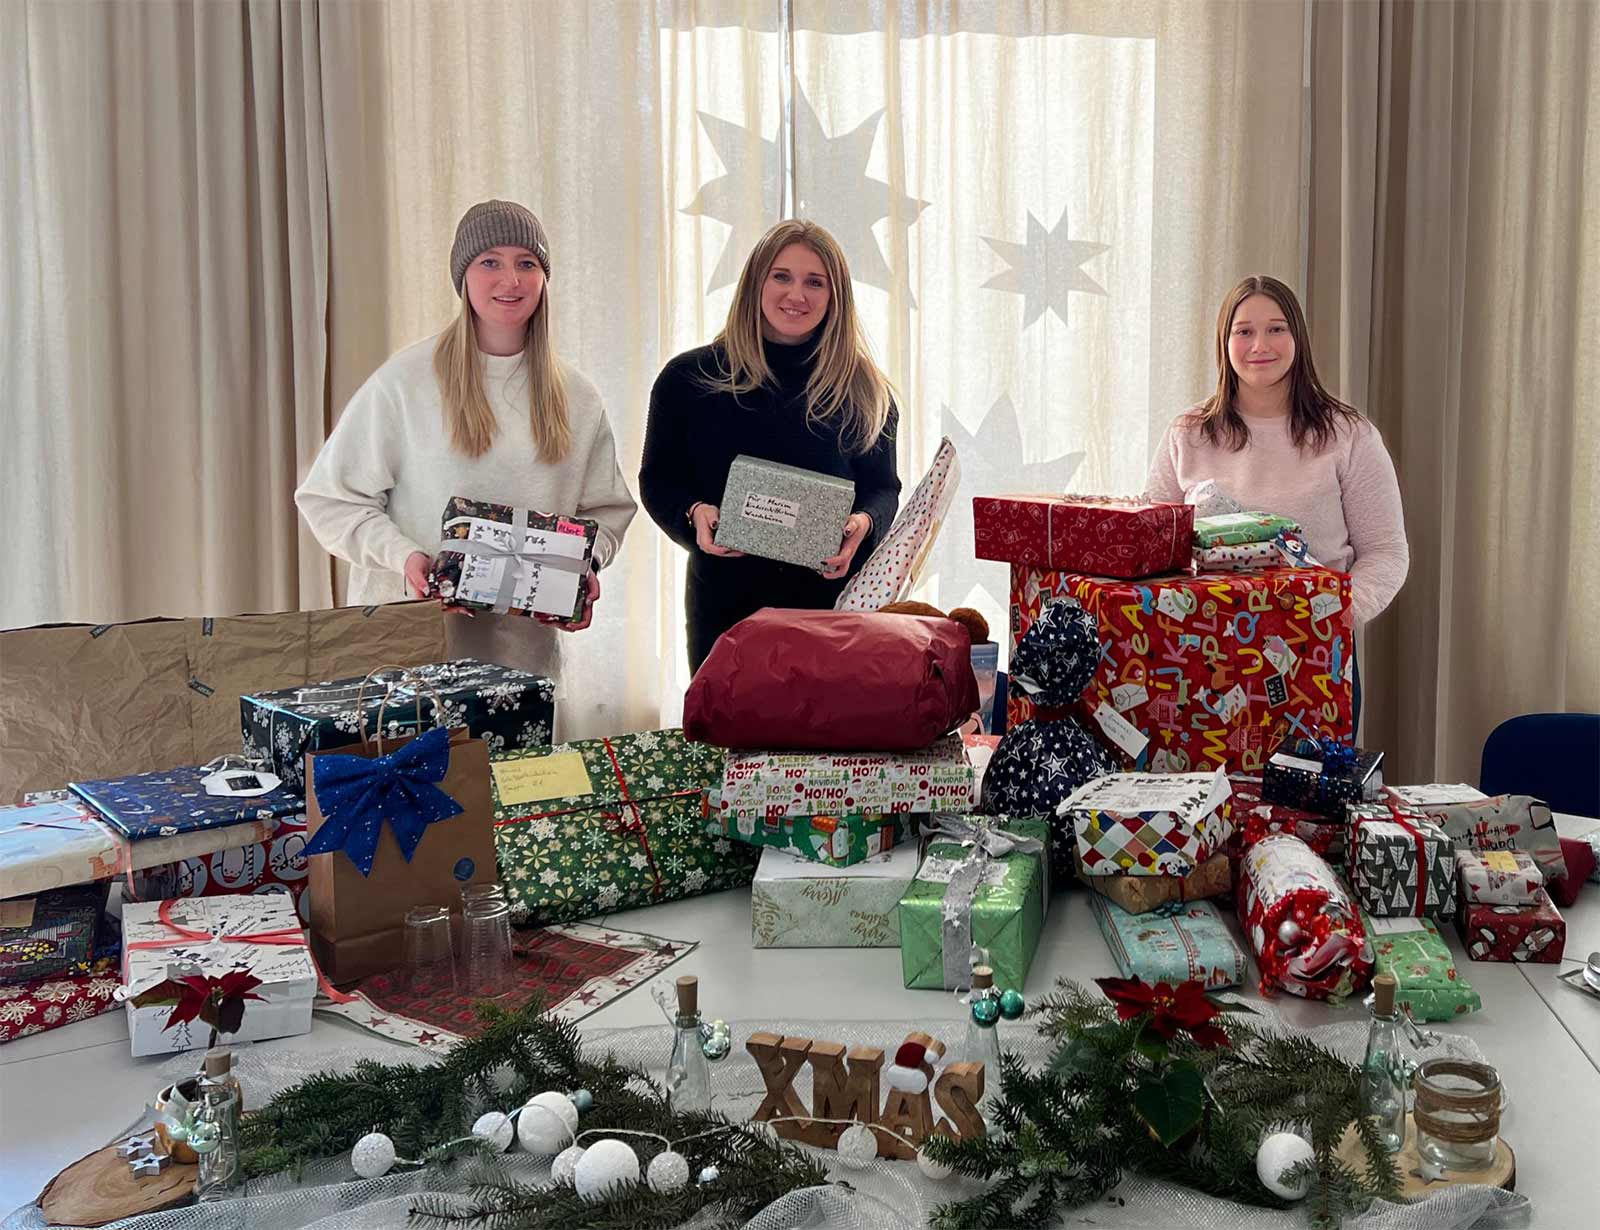 Christmas surprise: Caterpillar Energy Solutions apprentices Leonie Fenzel and Maren Hartmann took the gifts of the 